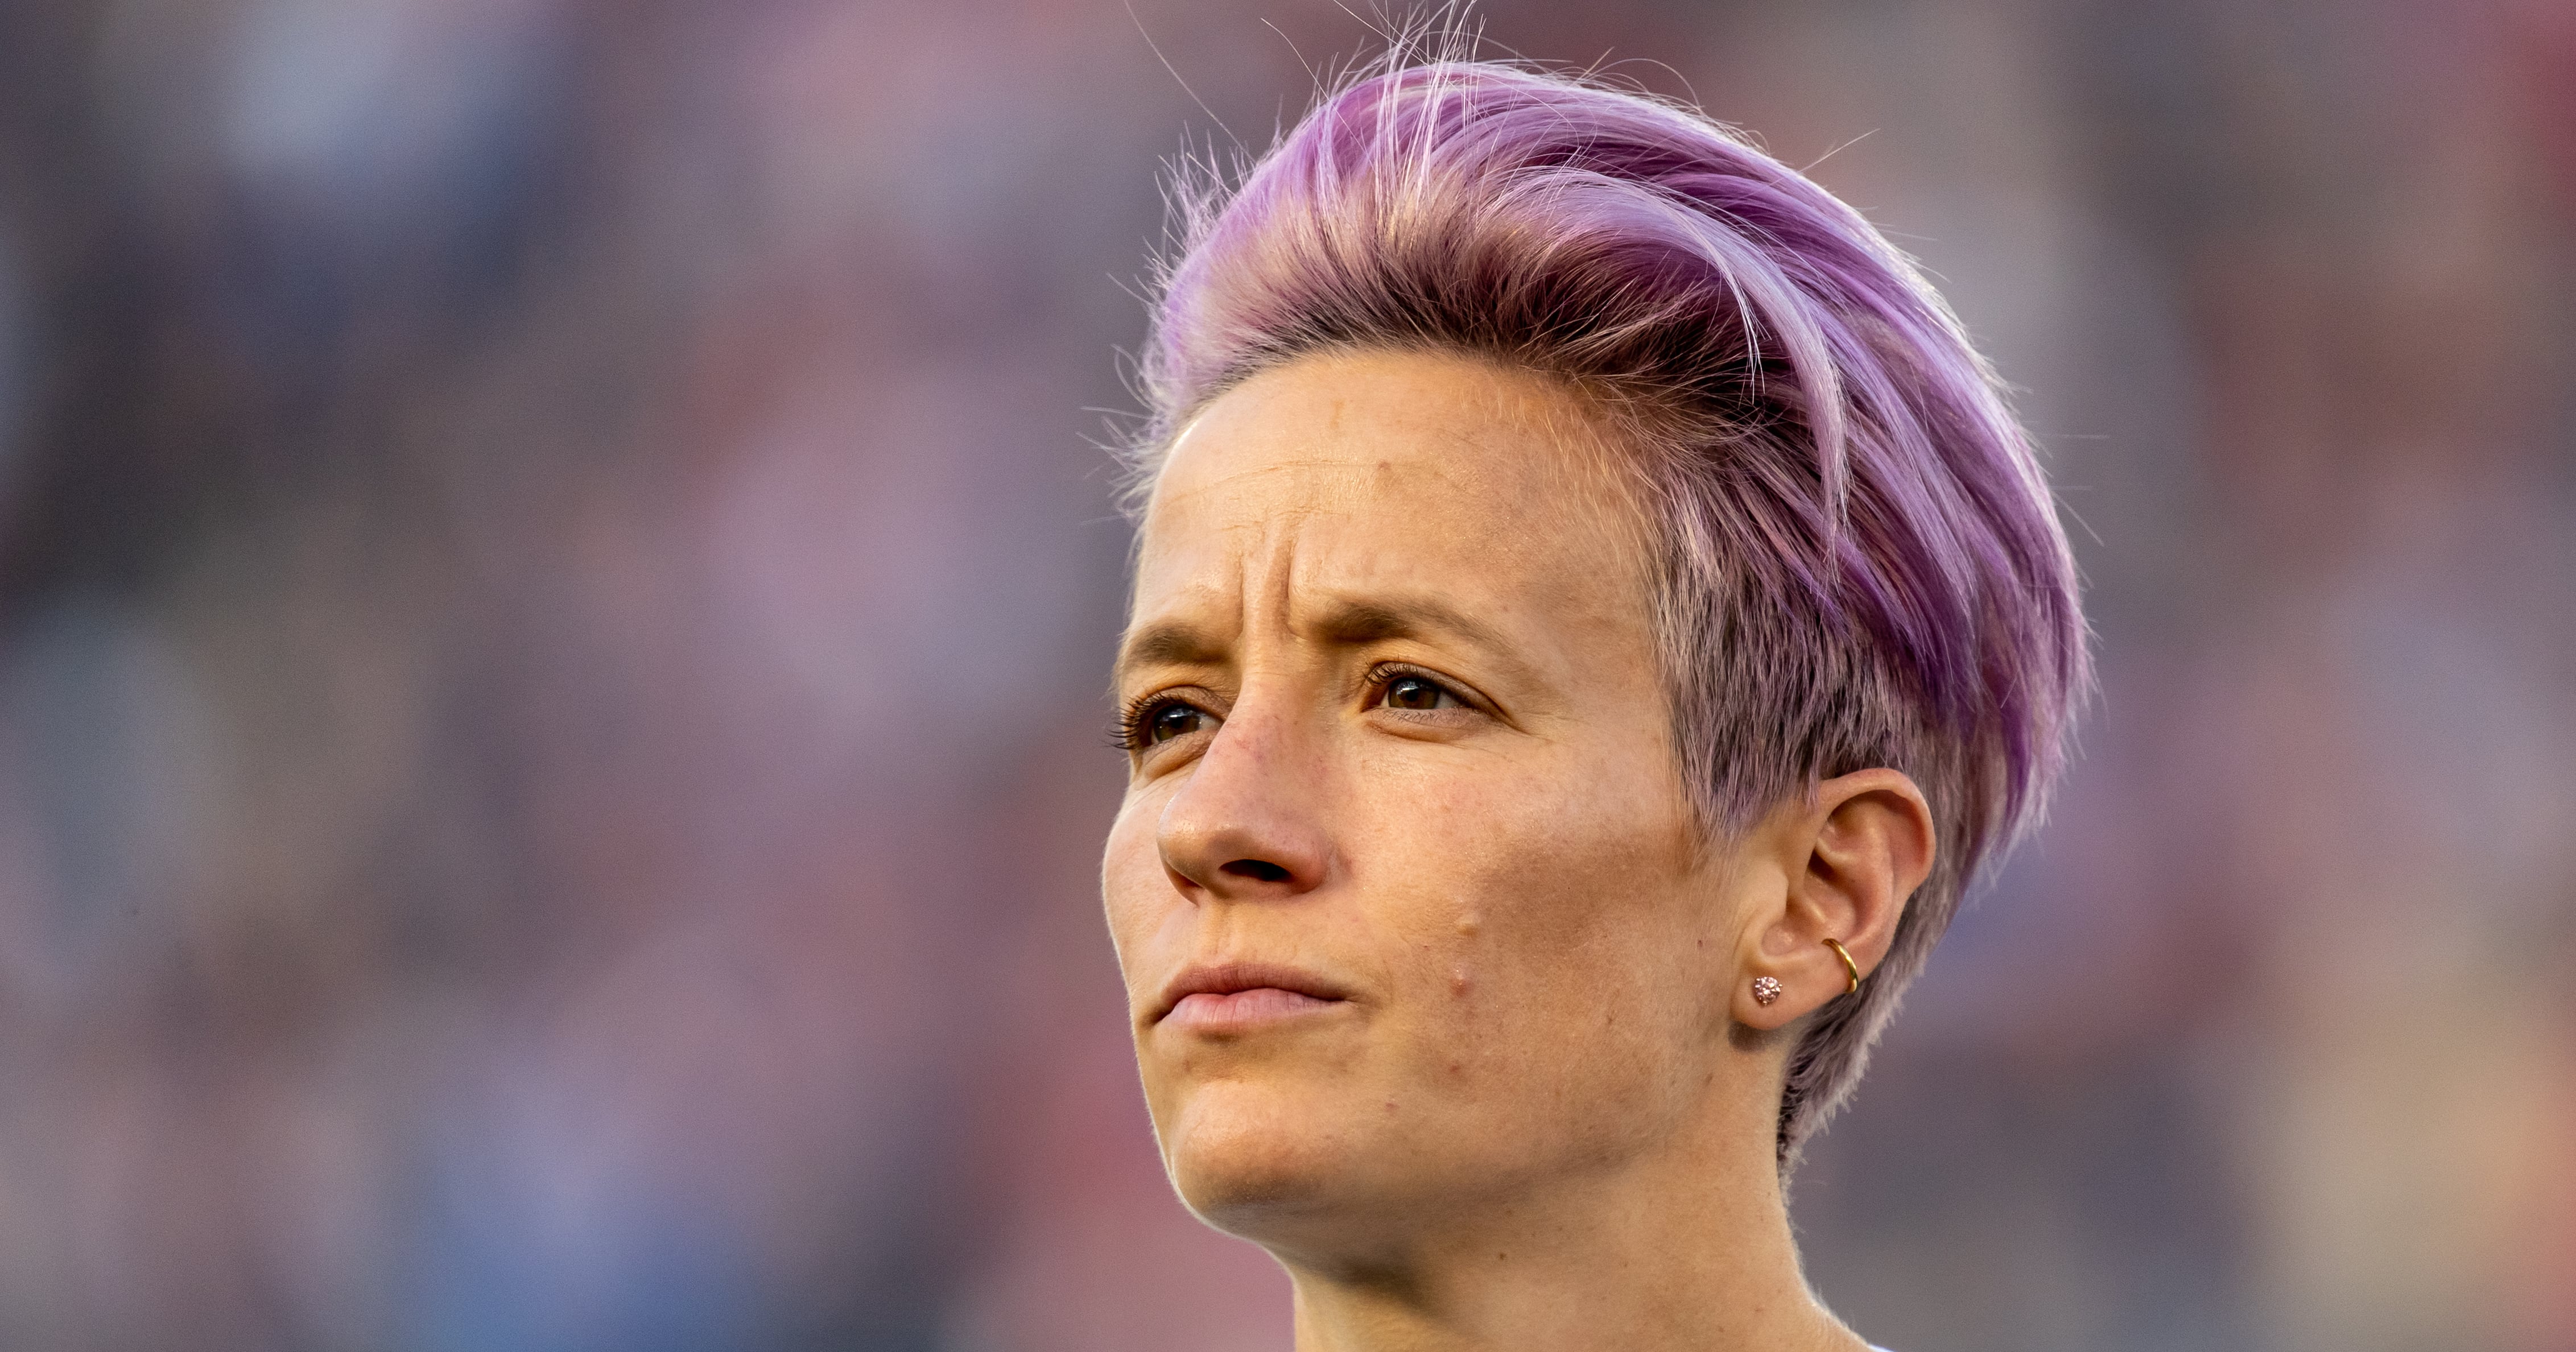 8. How Megan Rapinoe's Blue Hair Has Become a Symbol of LGBTQ+ Pride - wide 5